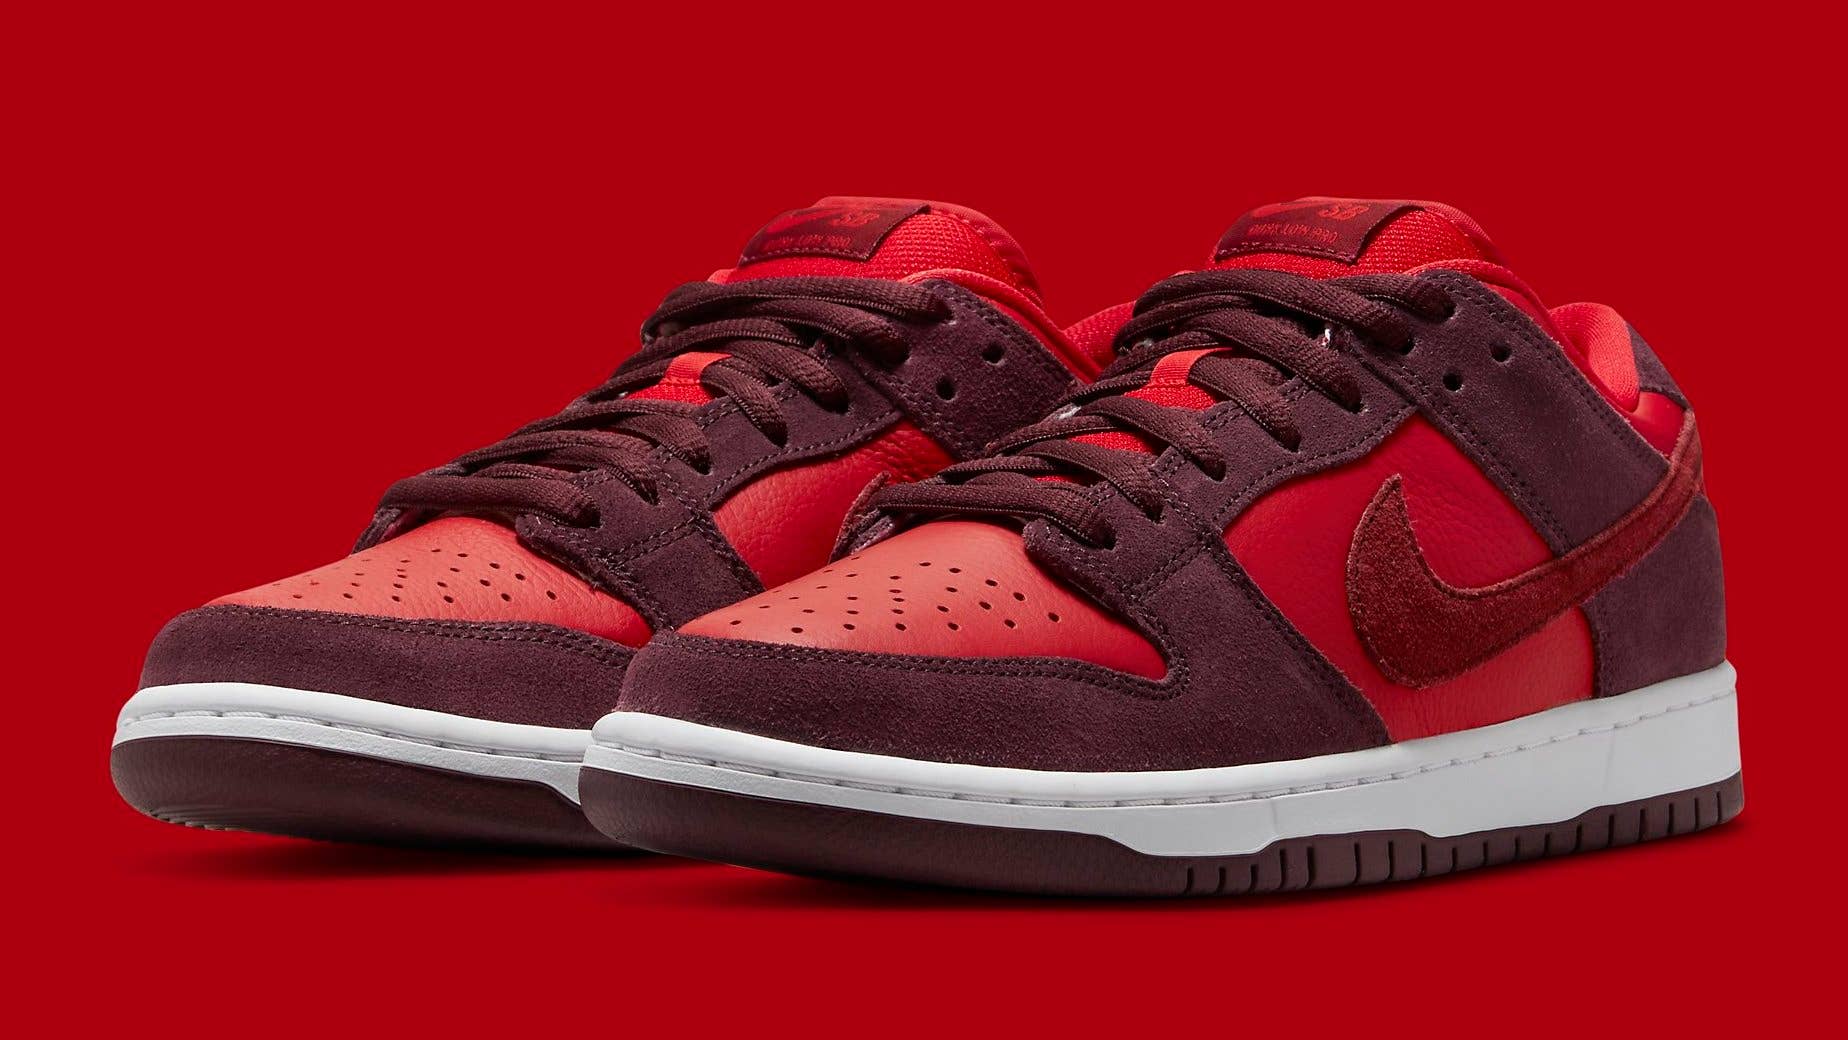 Nike SB Dunk Low Cherry Release Date DM0807-600 Pair